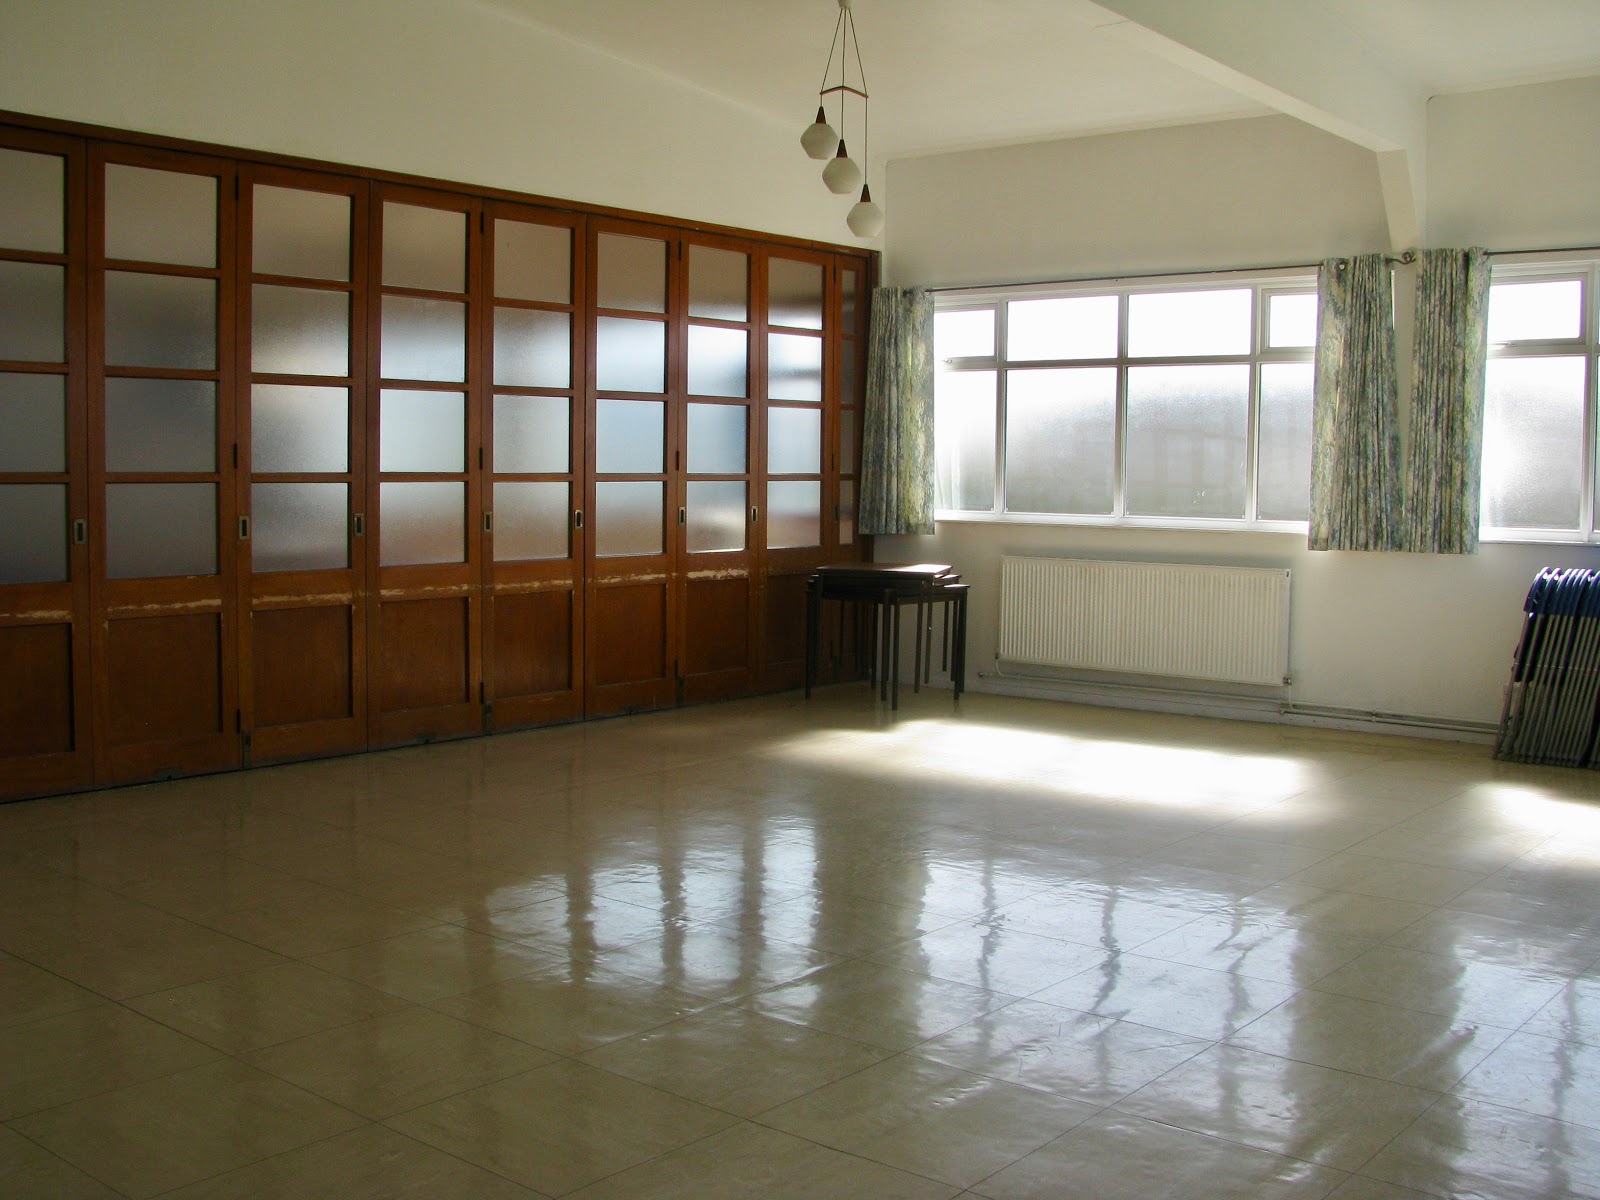 Showing floor space with linoleum floor, white walls, windows with sun shining through